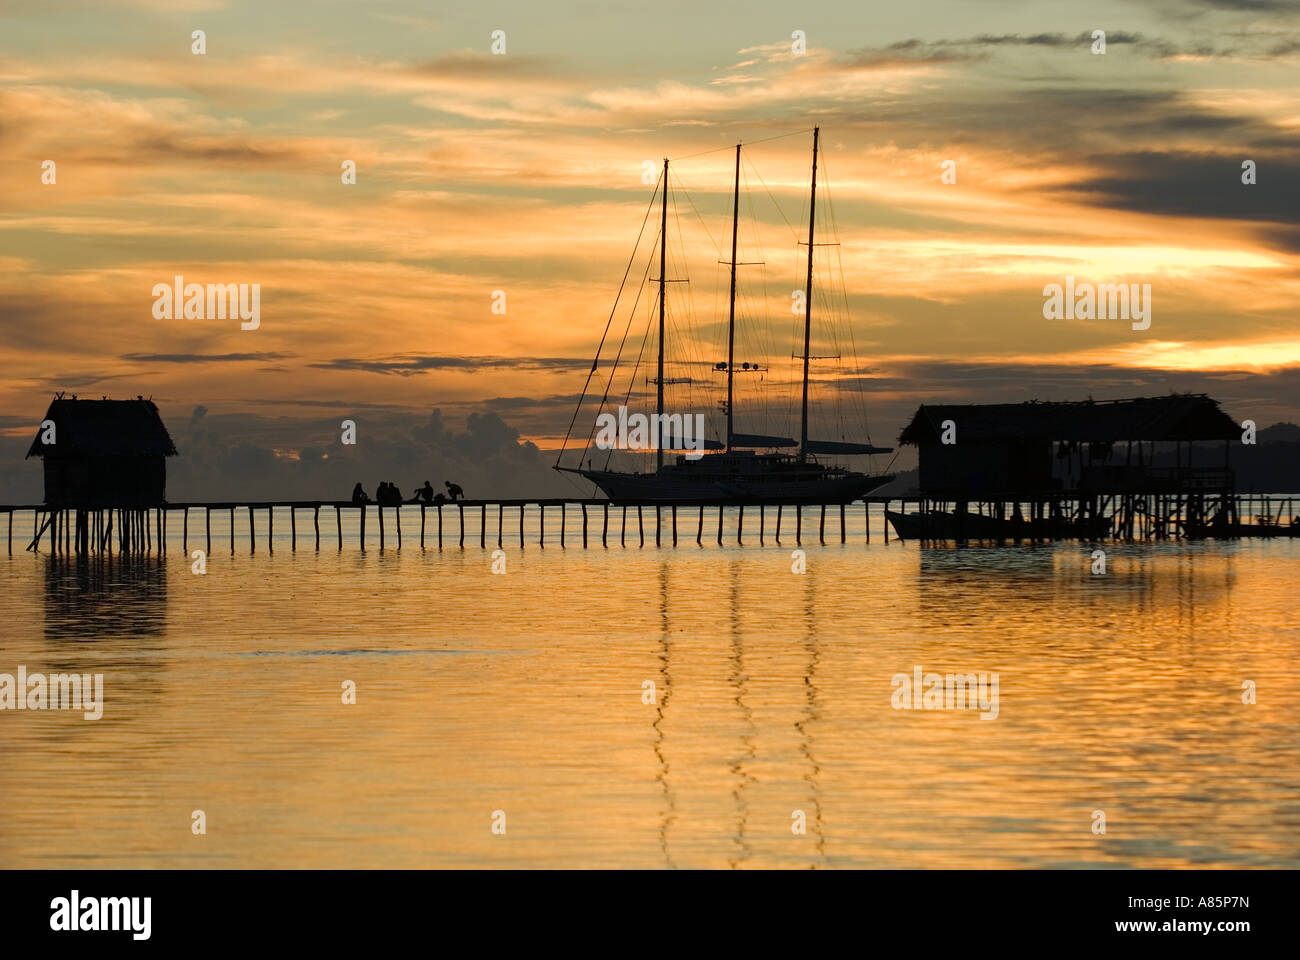 Sunset view of a sailing boat anchored on Kri Island, Raja Ampat Indonesia. Stock Photo